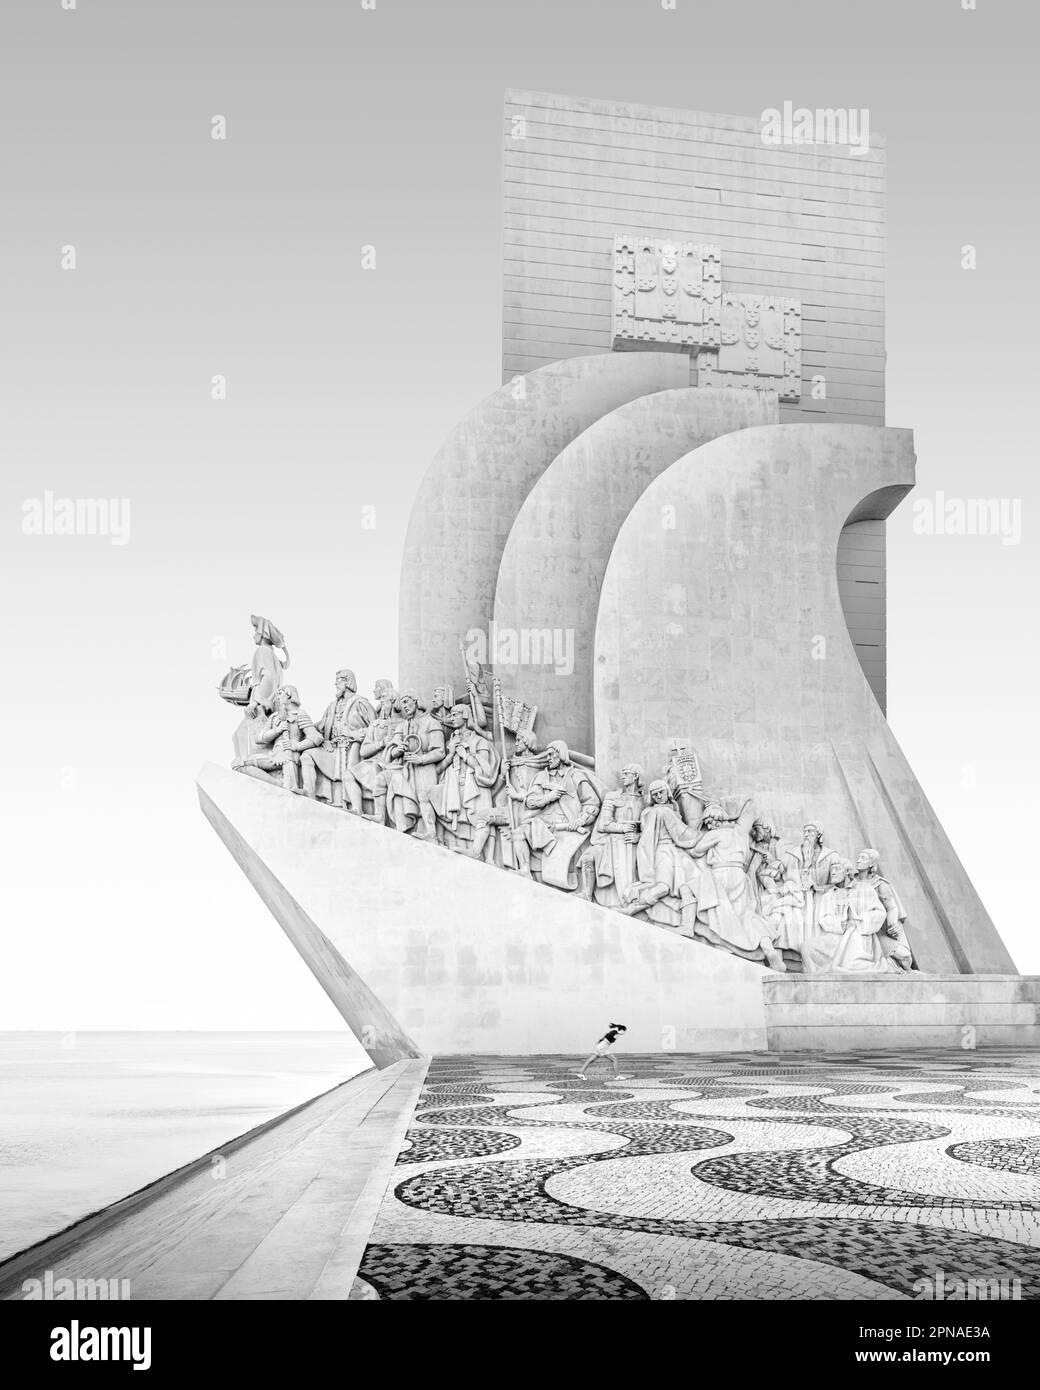 Black and white photograph of a running girl at the seafarers' monument Padrao dos Descobrimentos on the river Tagus in Lisbon, Portugal Stock Photo